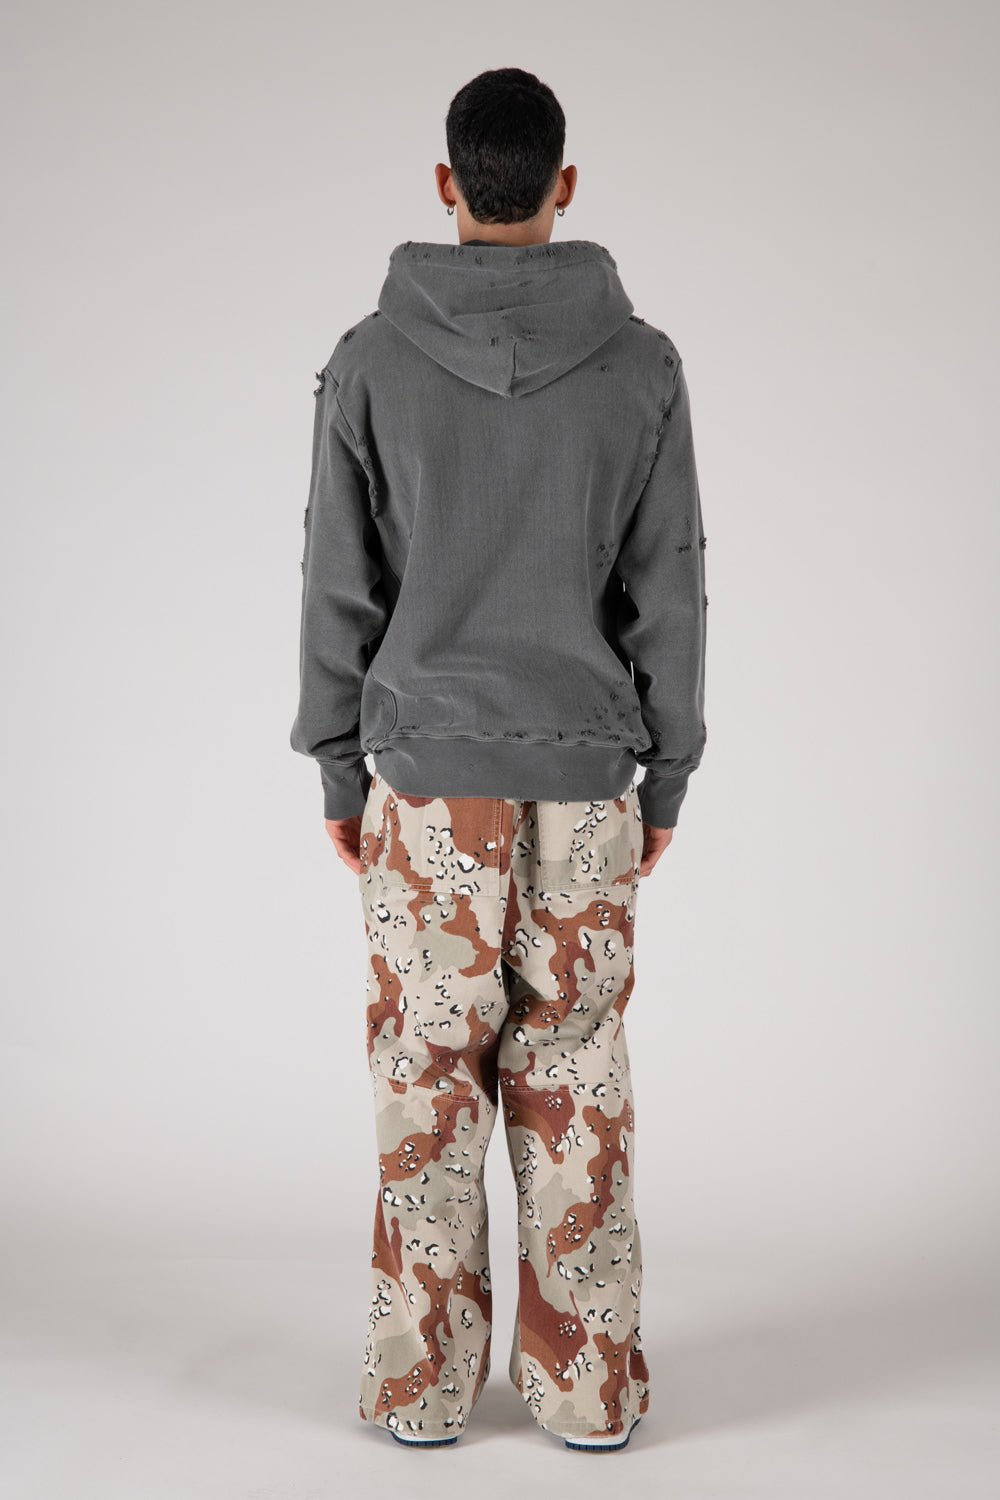 SK8 - CAMO Camouflage skater pants with front button and zip closure. Back leather logo patch. Five pockets. Composition: 100% Cotton HTC LOS ANGELES